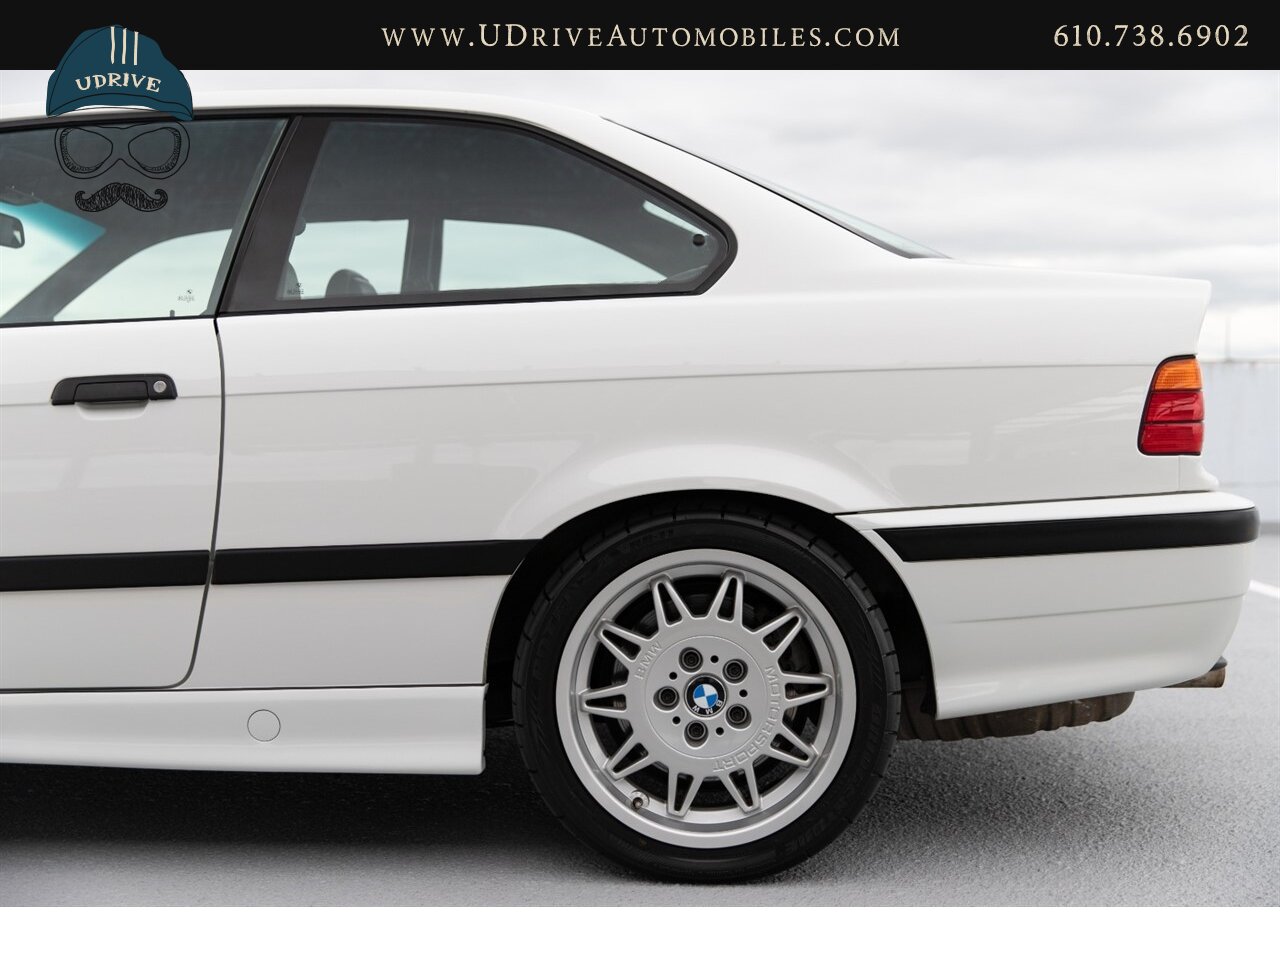 1995 BMW M3 E36 Alpine White over Black Vader Seats  5 Speed - Photo 22 - West Chester, PA 19382